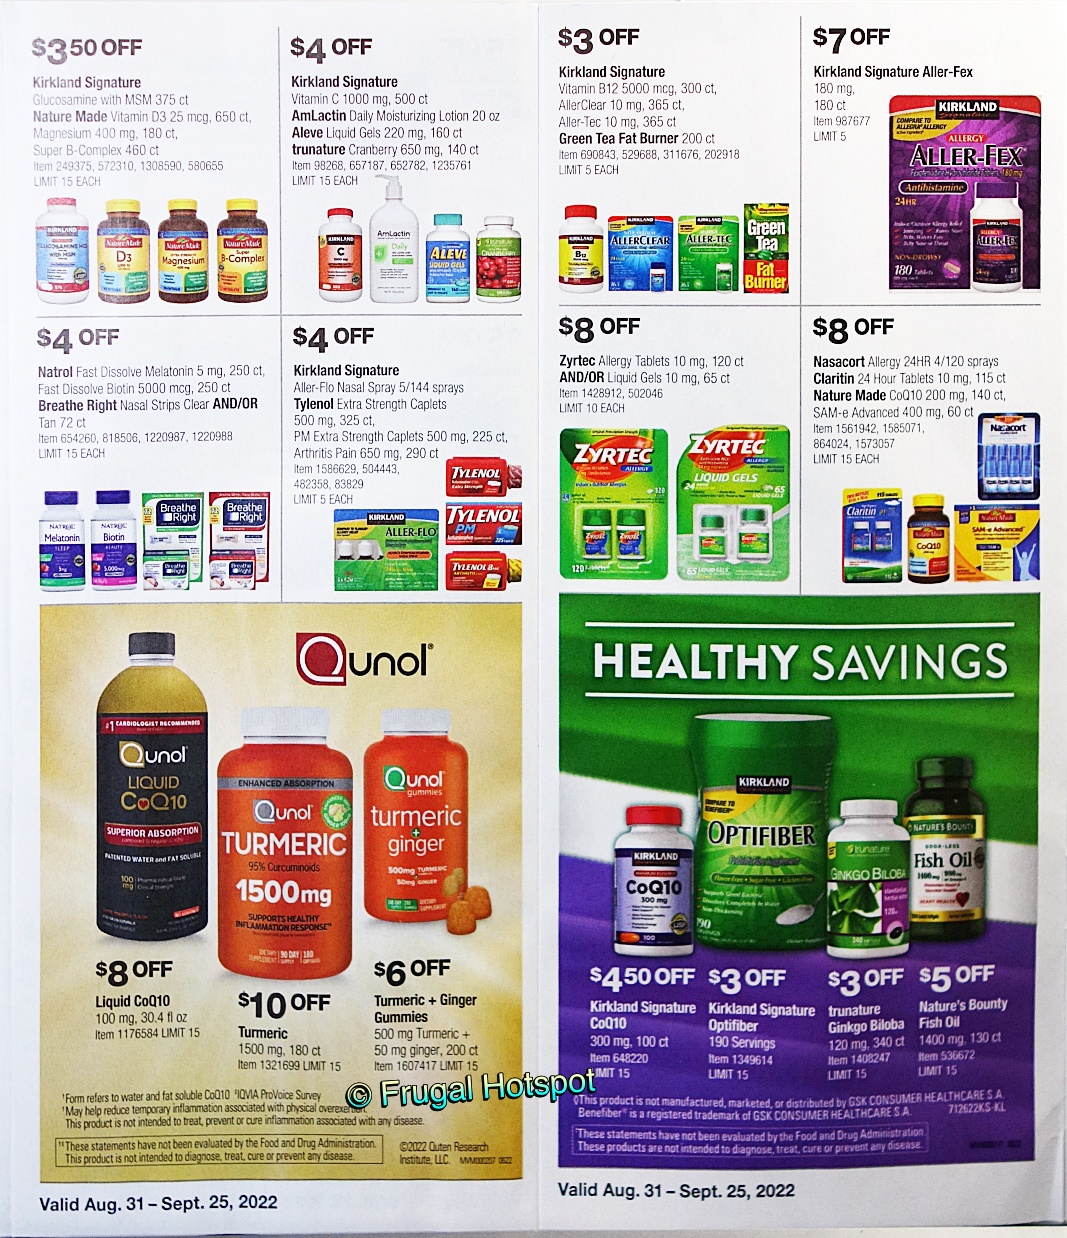 Costco Coupon Book SEPTEMBER 2022 | P 22 and 23